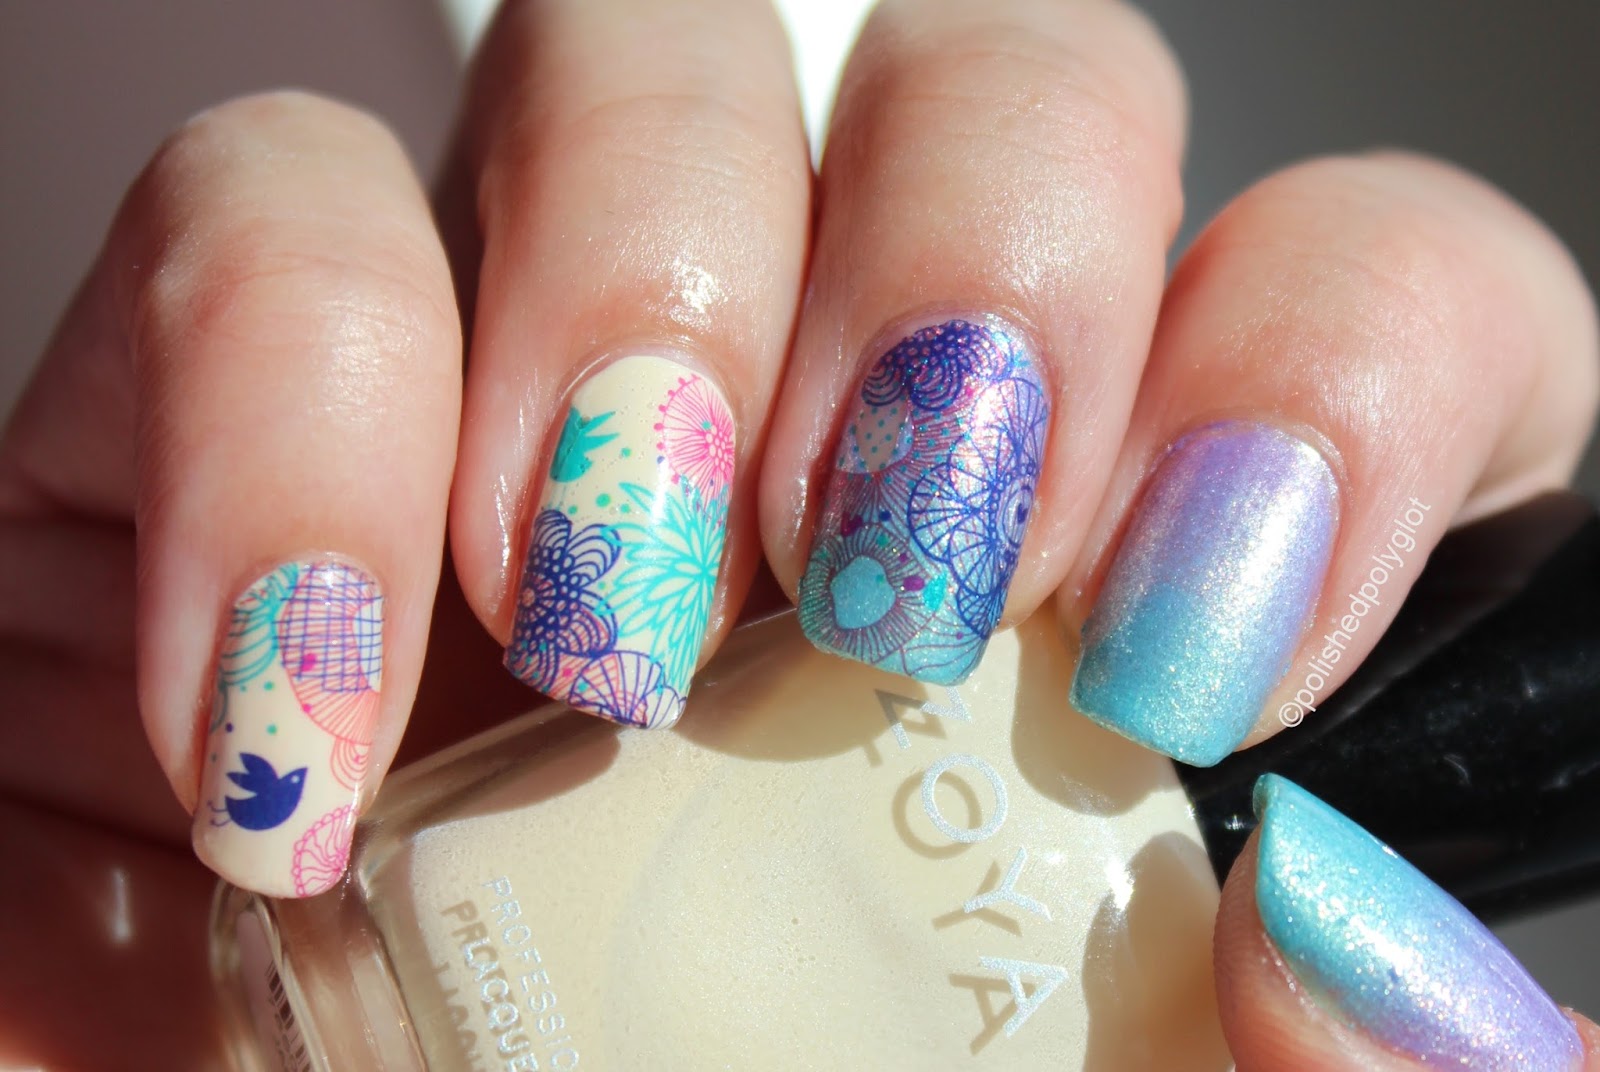 NOTD: Water Decals Festival! / Polished Polyglot